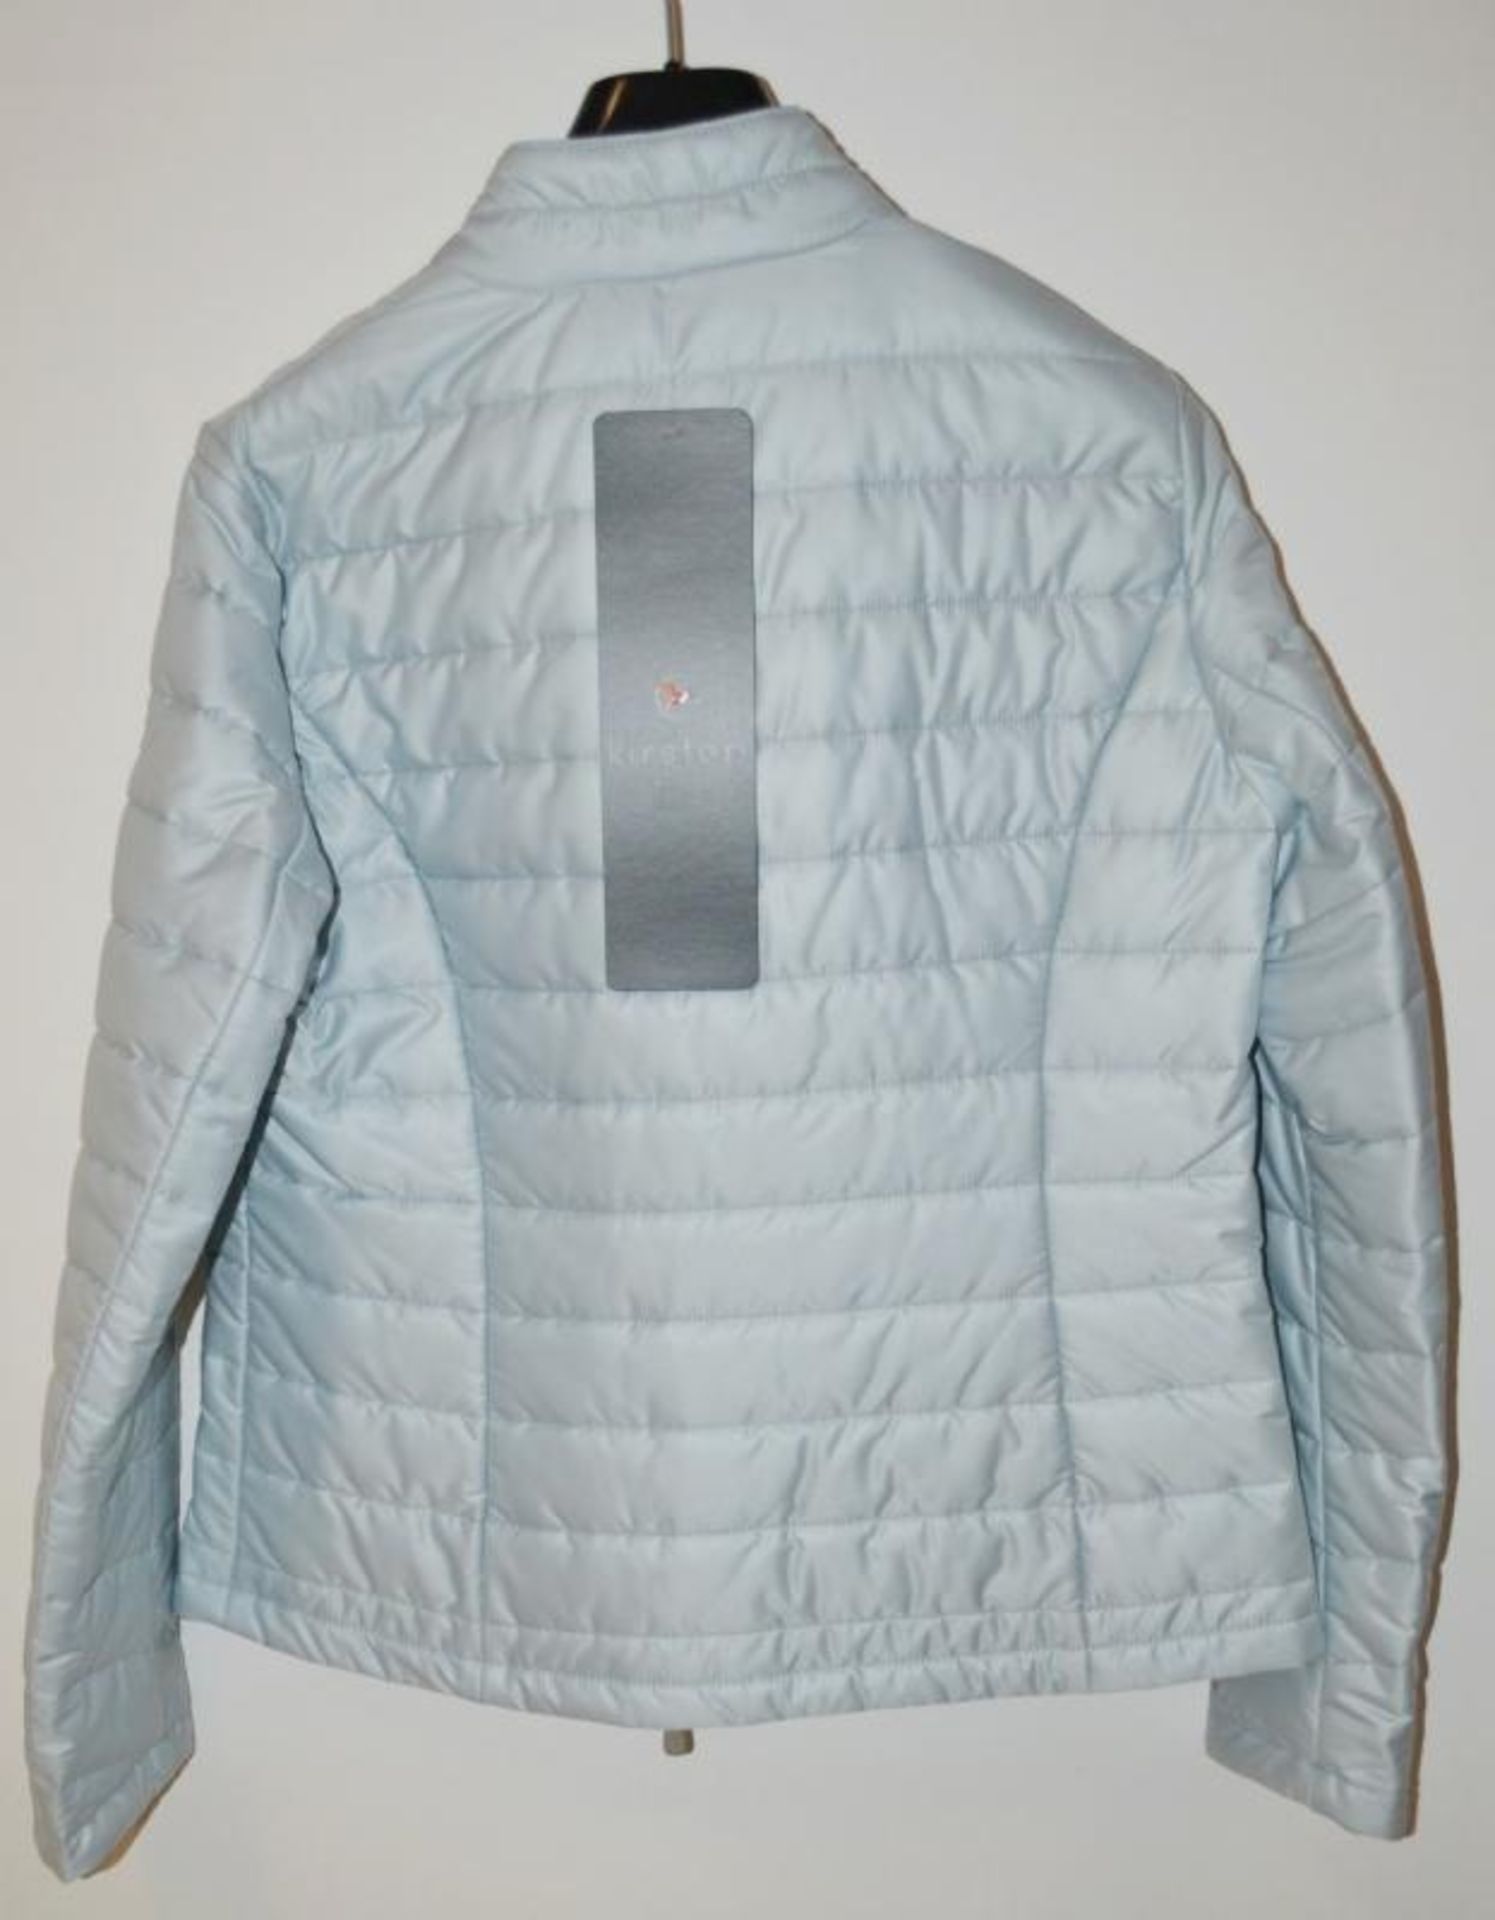 1 x Steilmann Kirsten Womens Quilted Winter Jacket - Size 12 - Colour: Pale Blue - Light-weight With - Image 2 of 8